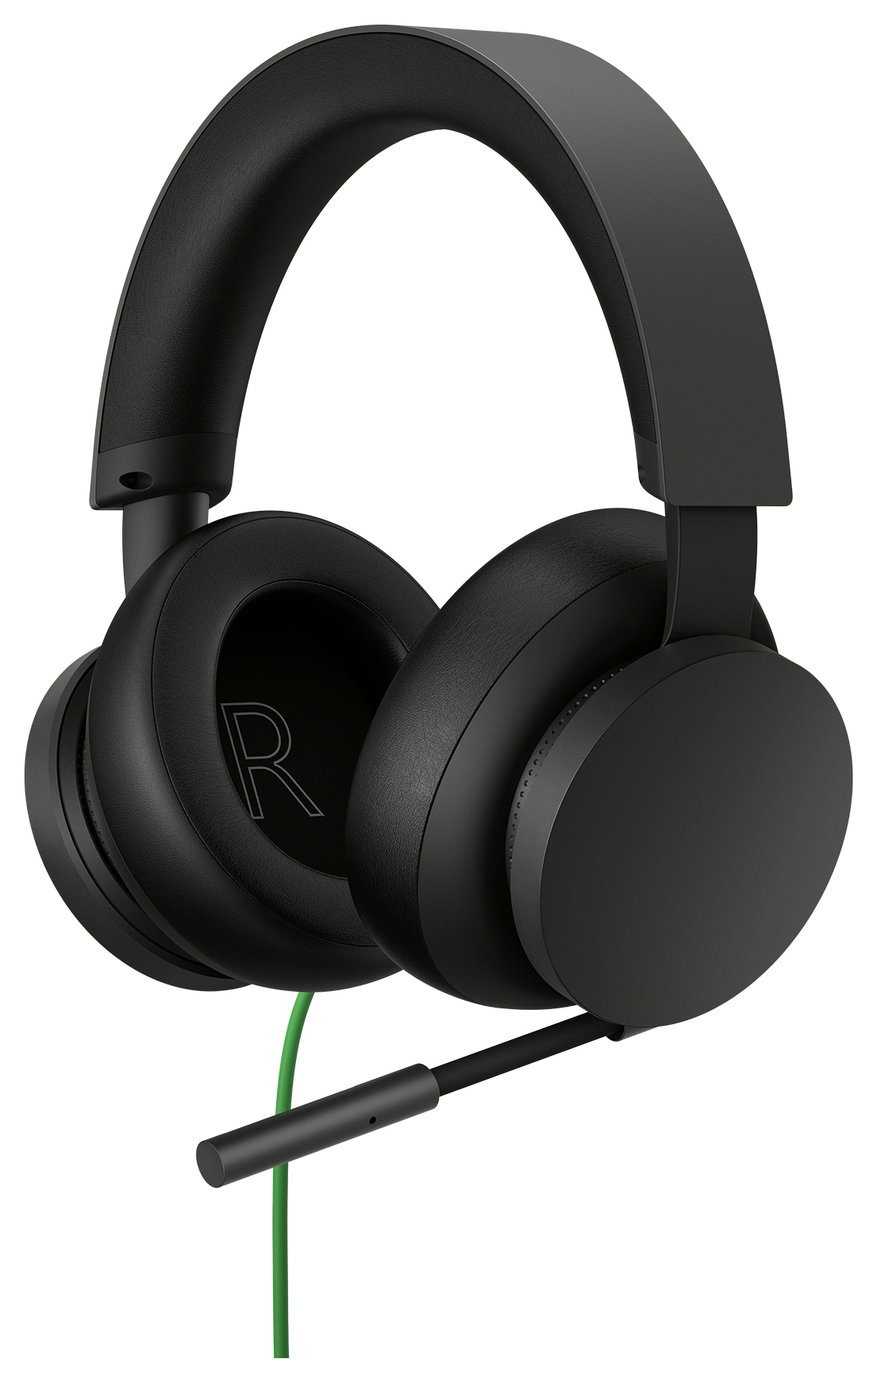 Official Xbox Stereo Wired Gaming Headset - Black